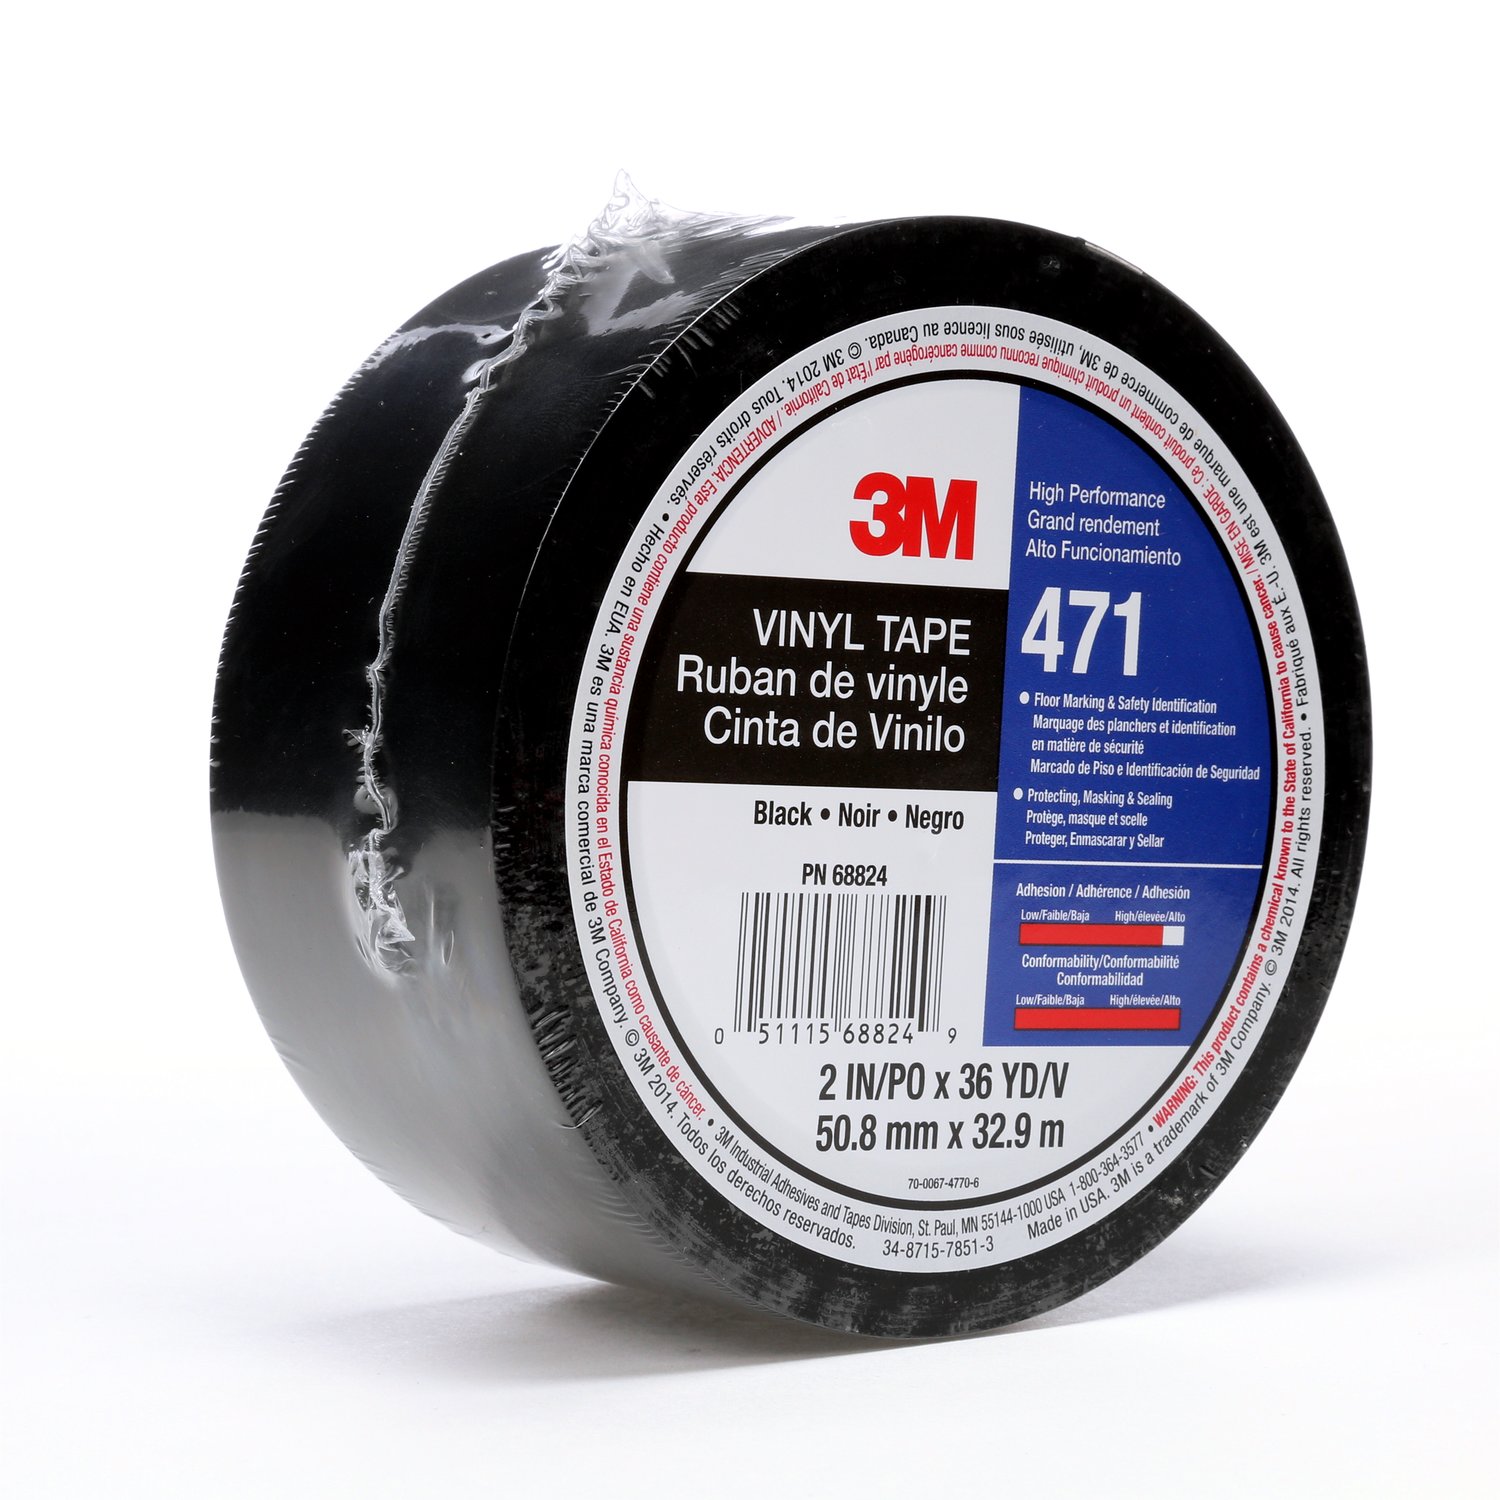 7100044330 - 3M Vinyl Tape 471, Black, 2 in x 36 yd, 5.2 mil, 5.2 mil, 24 rolls per
case, Individually Wrapped Conveniently Packaged